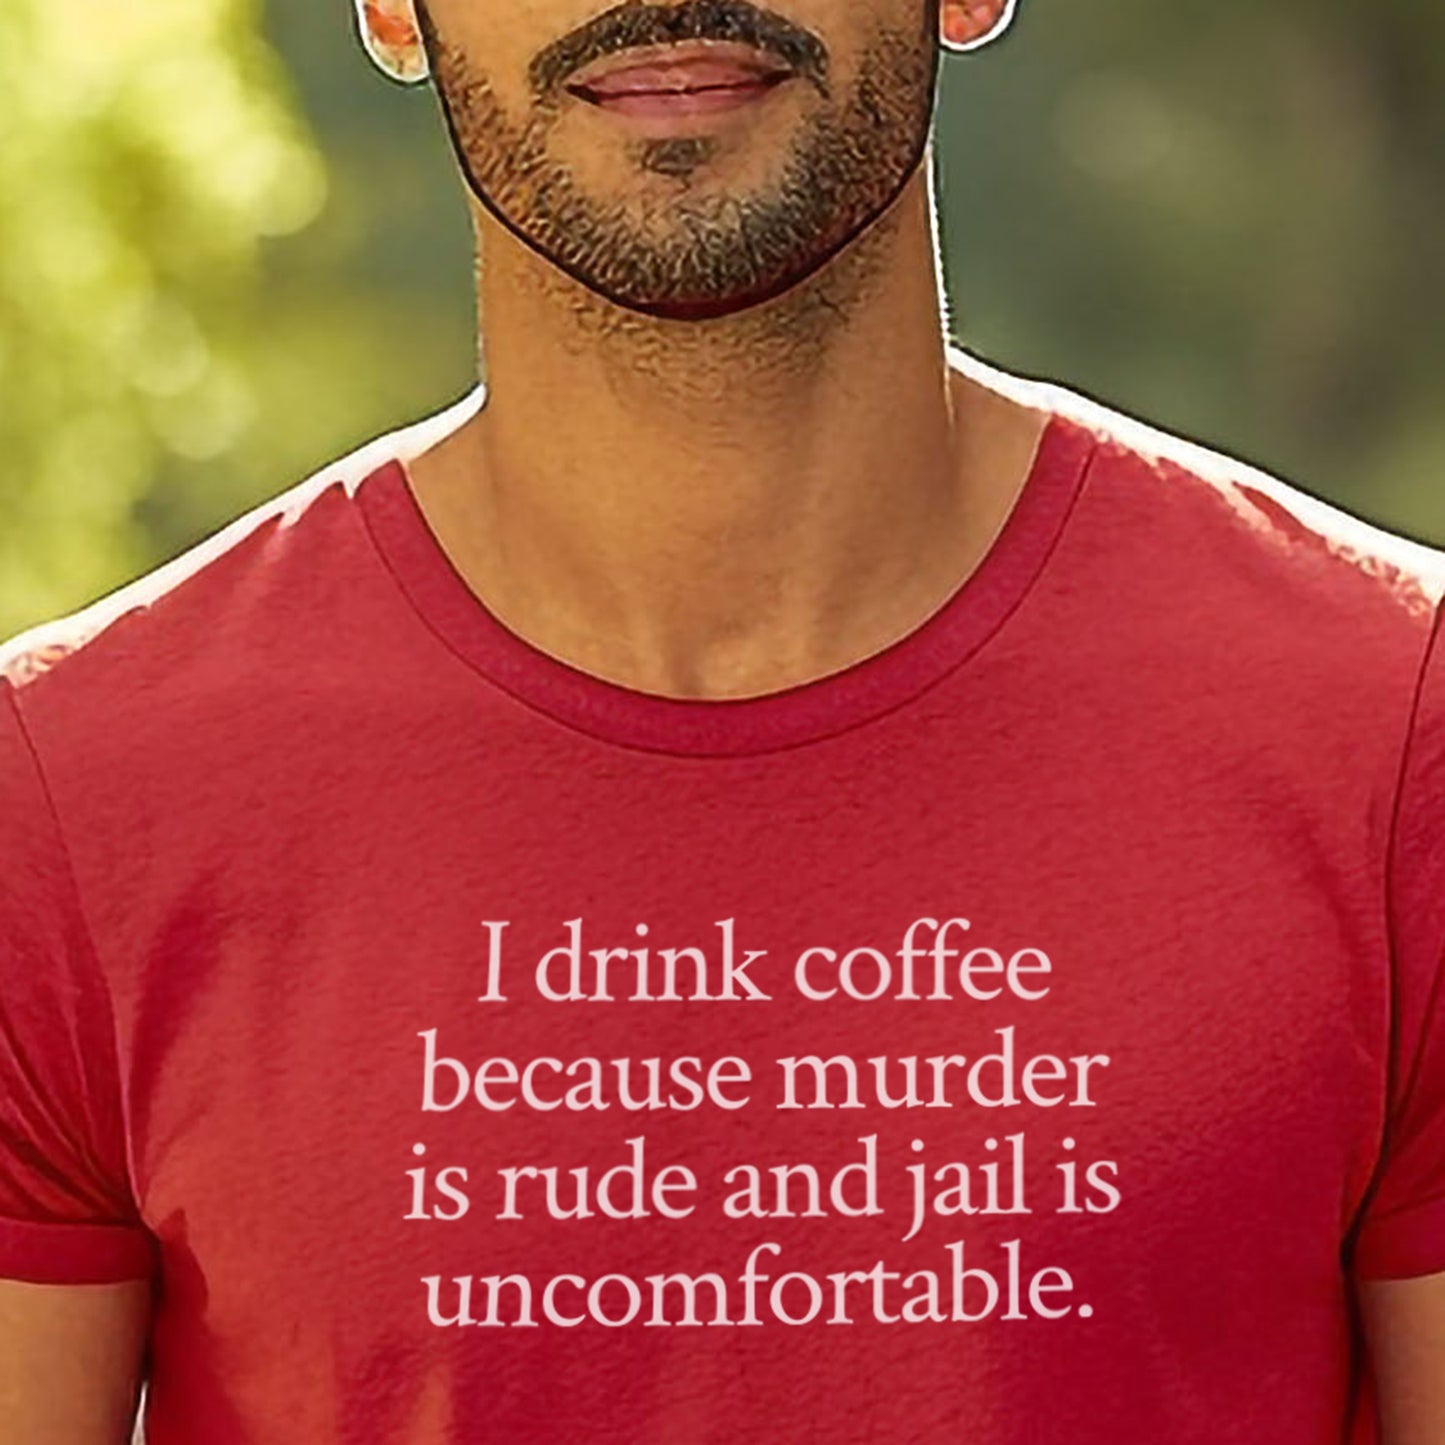 I drink coffee because murder is rude and jail is uncomfortable.